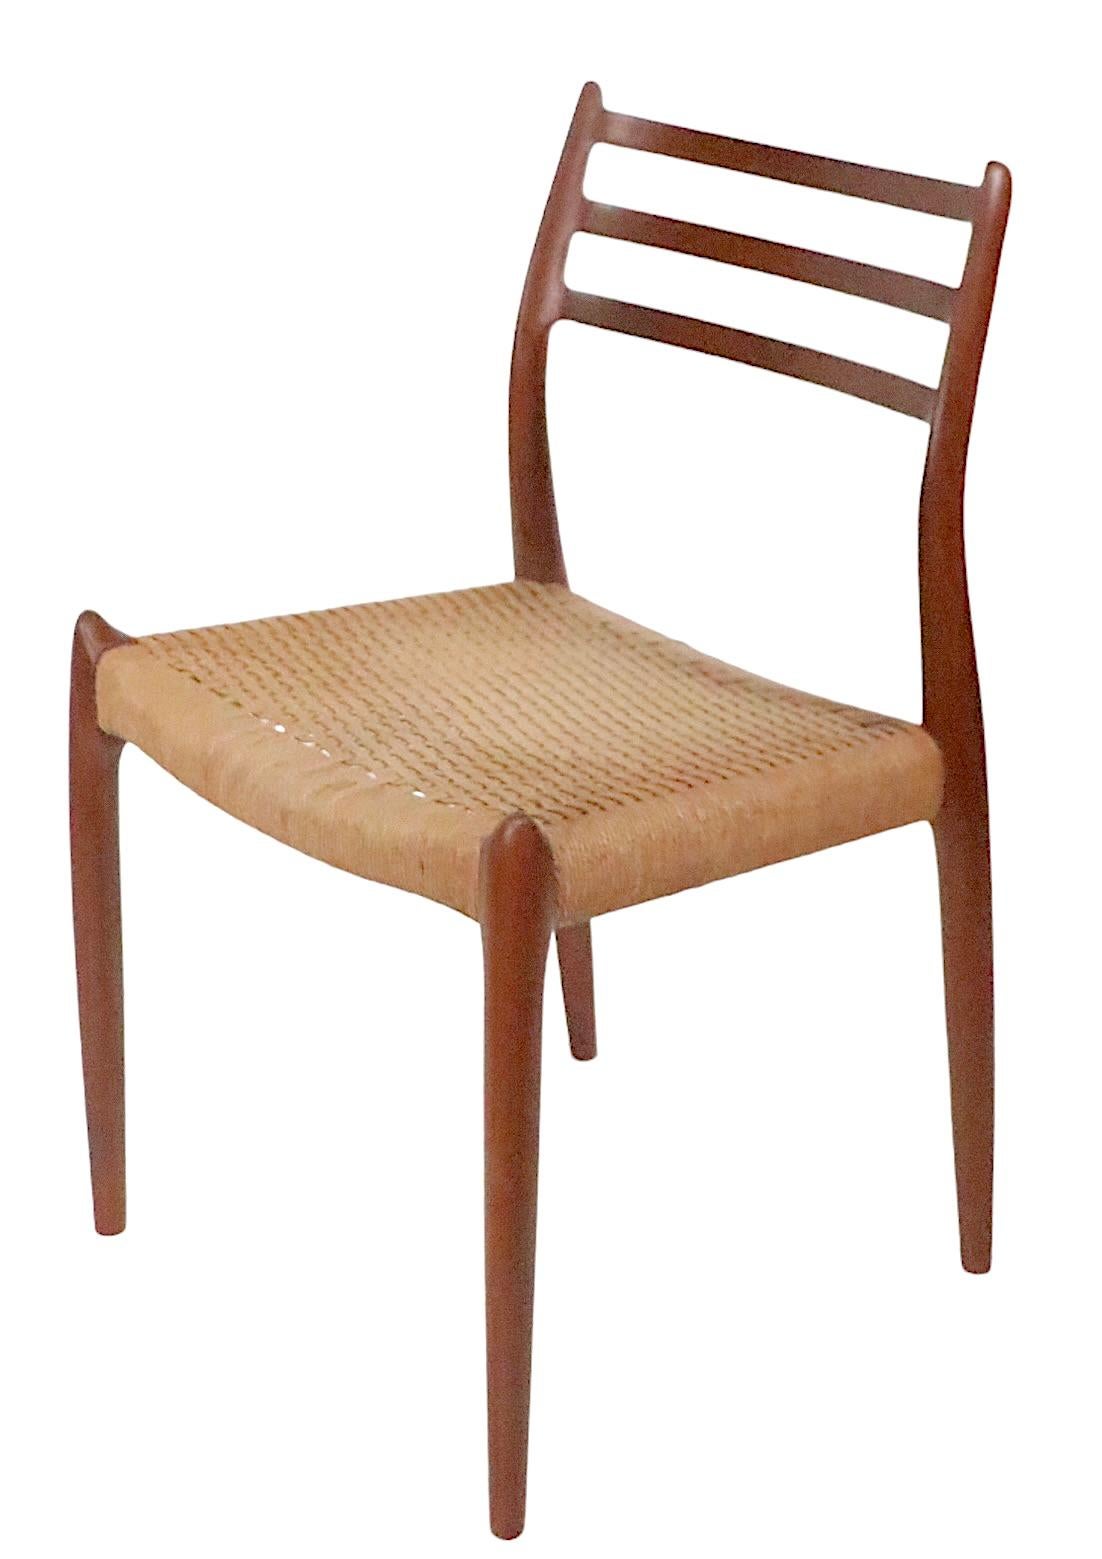 Danish Set of Eight Teak Dining Chairs by Neils Moller / J.L.Moller, circa 1960s For Sale 4